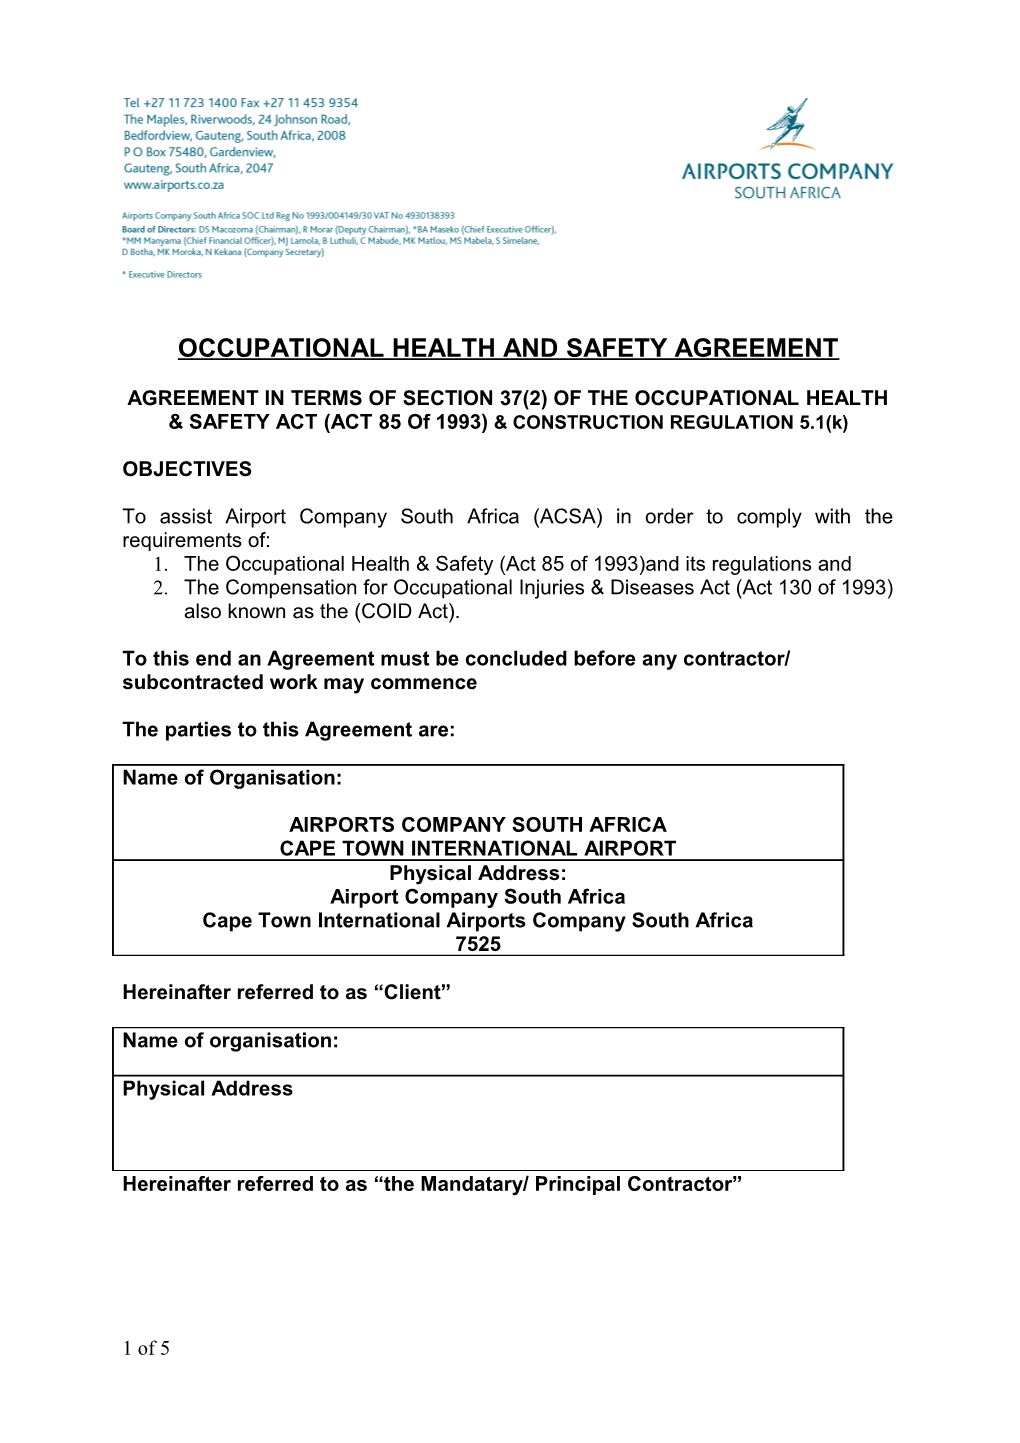 Occupational Health and Safety Agreement